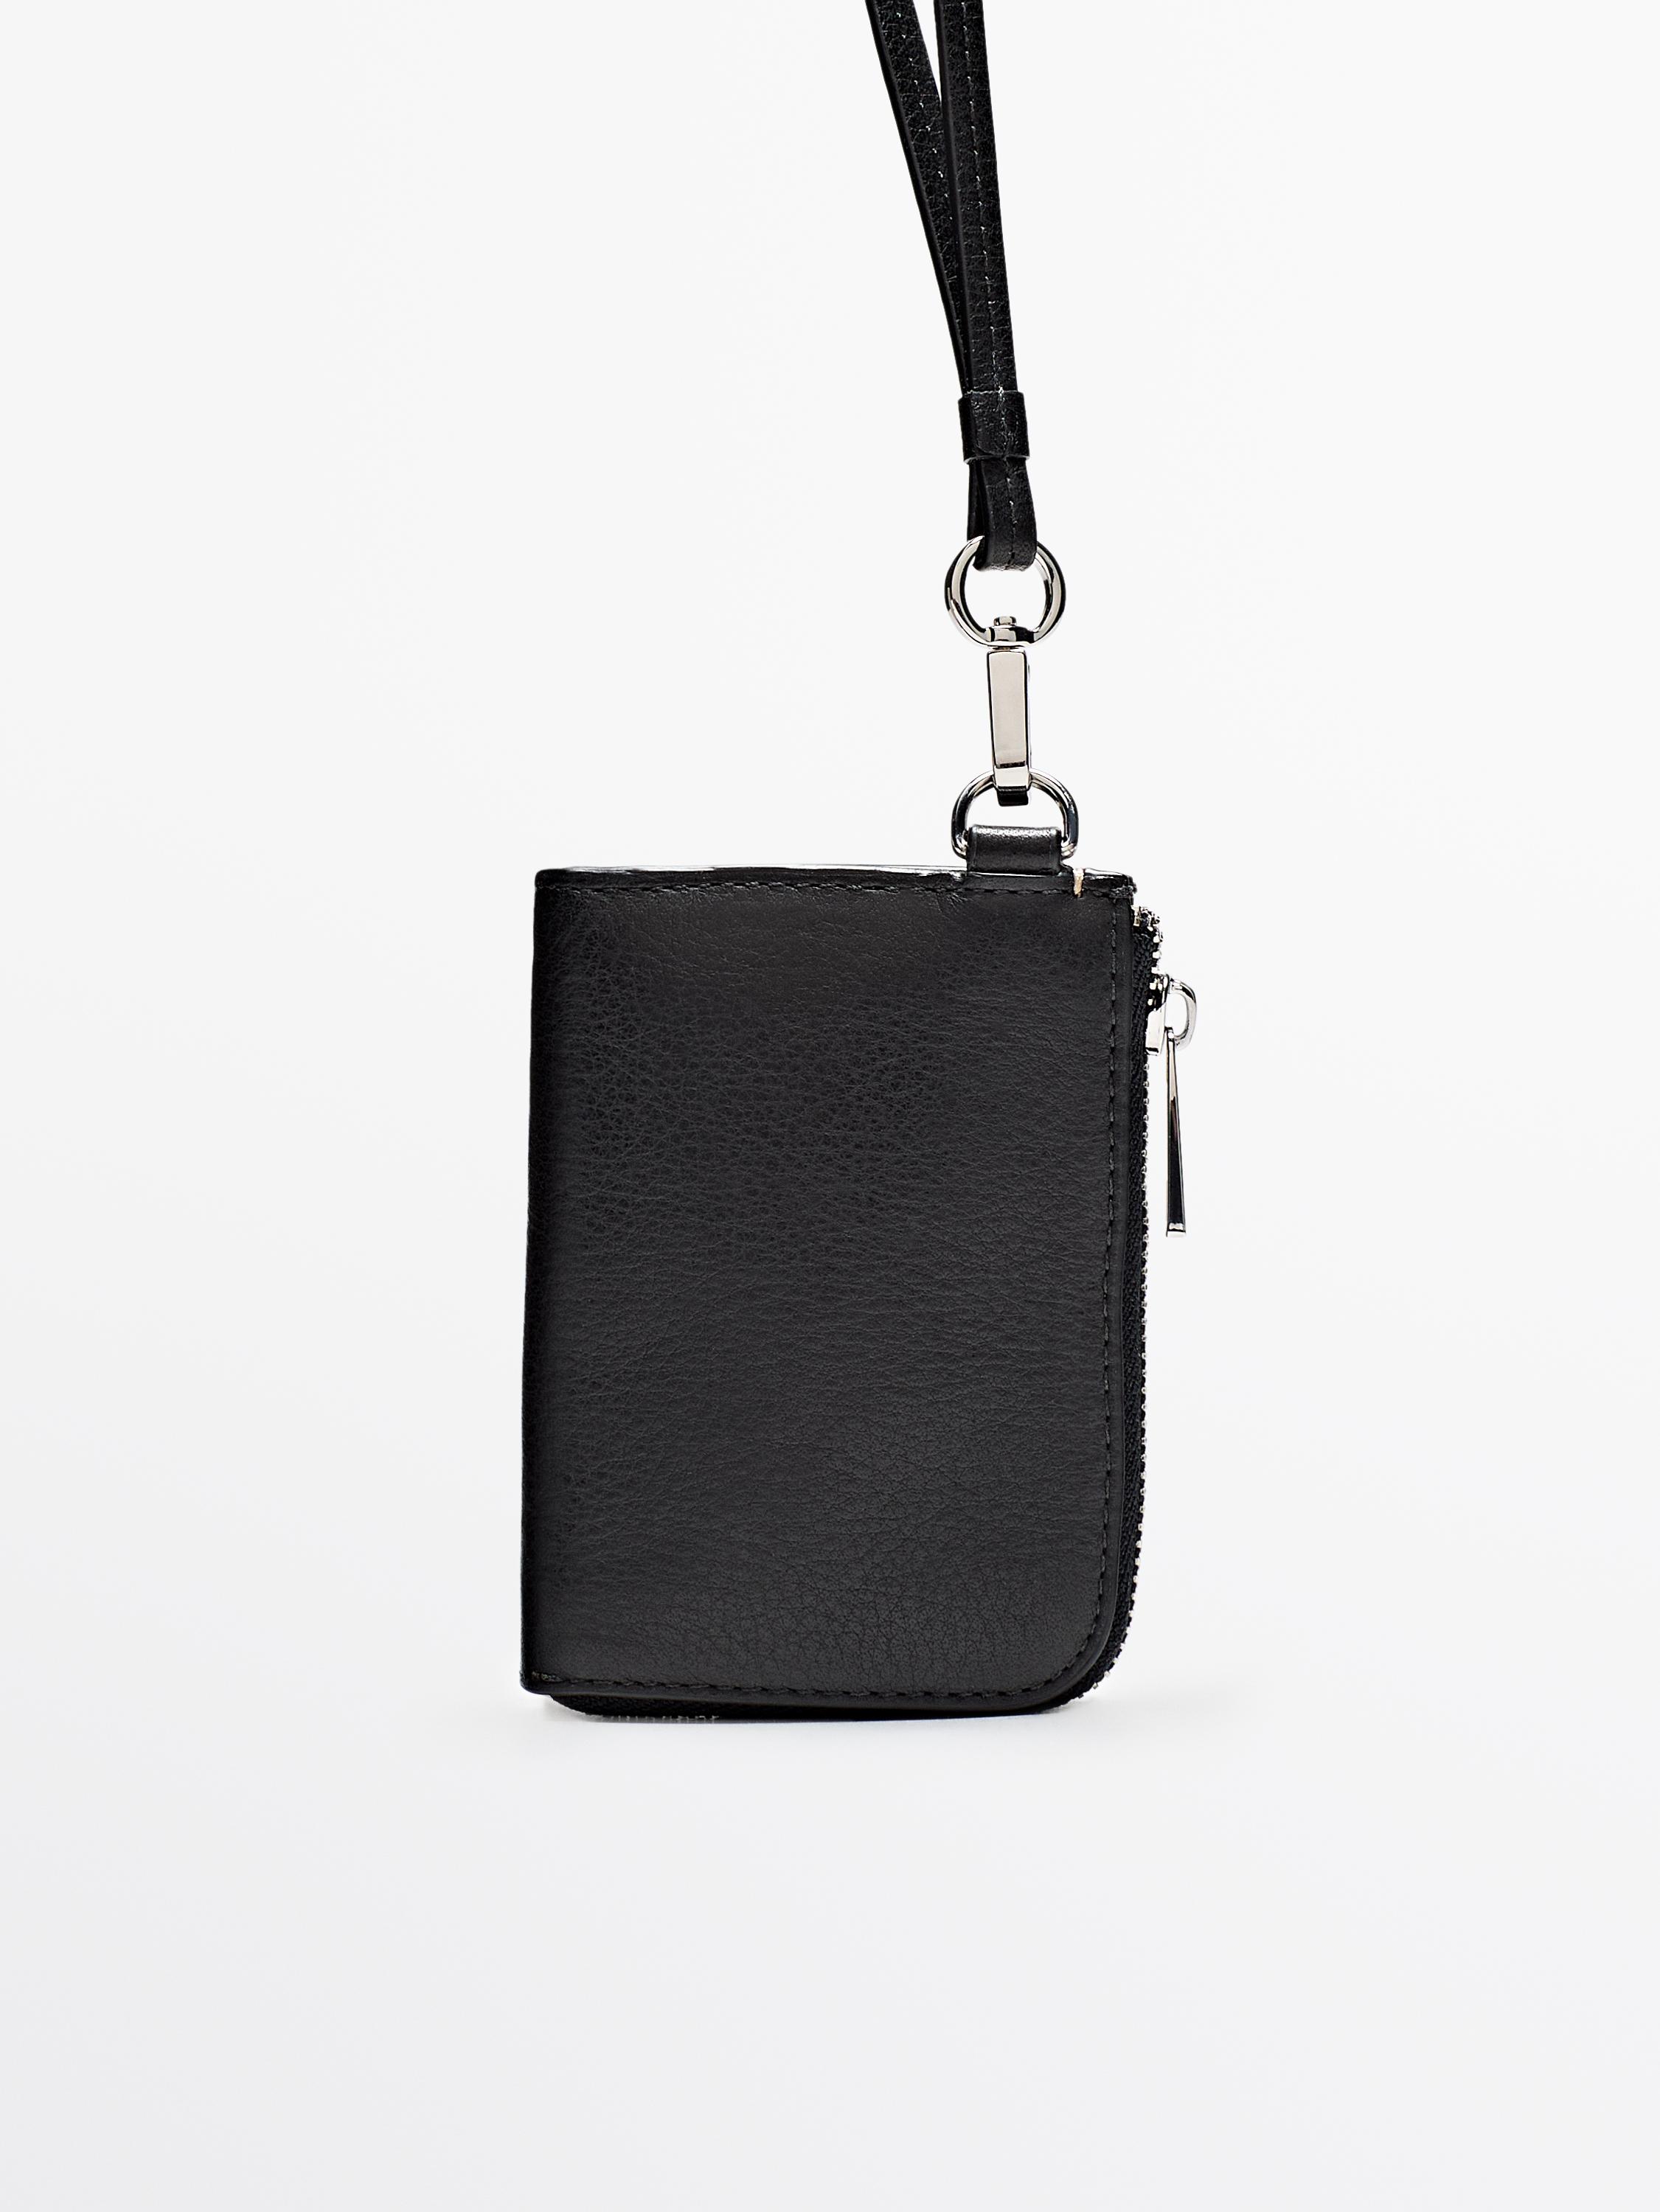 Leather wallet with strap - Black | ZARA United States